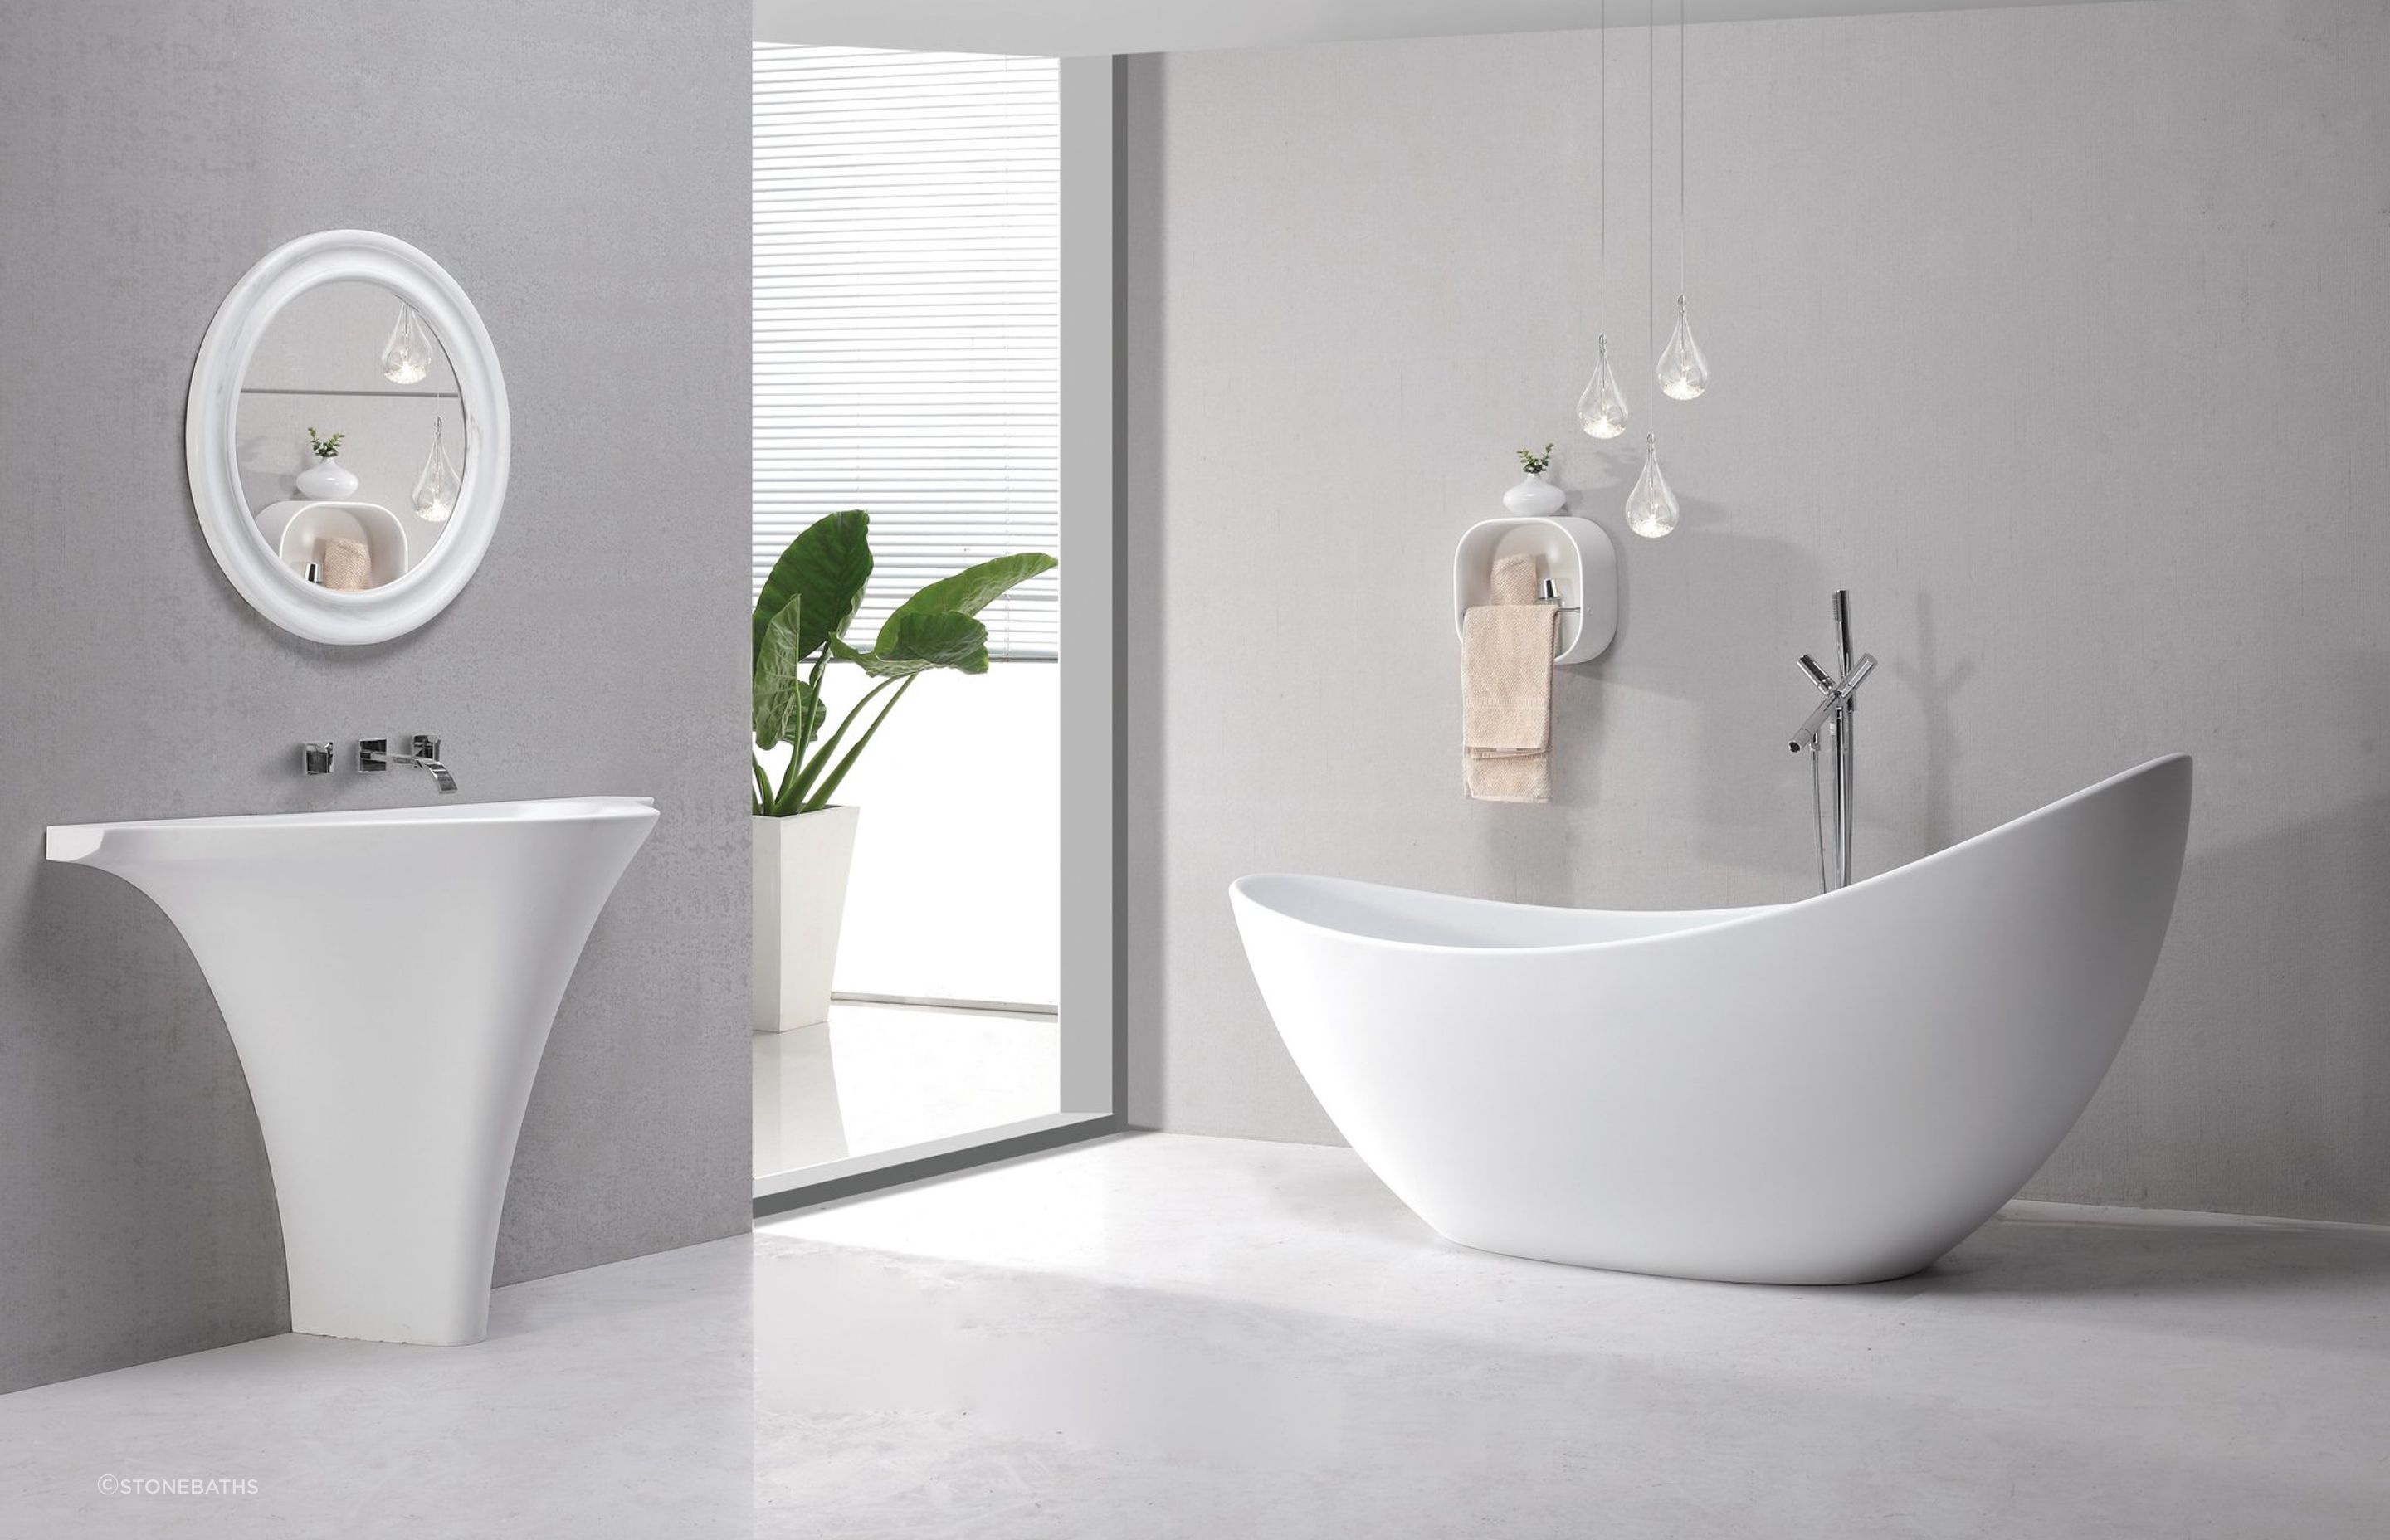 One of the many great things about a freestanding bath, like the B072 Large Hugi Bath featured here, is that it can be placed virtually anywhere in your bathroom